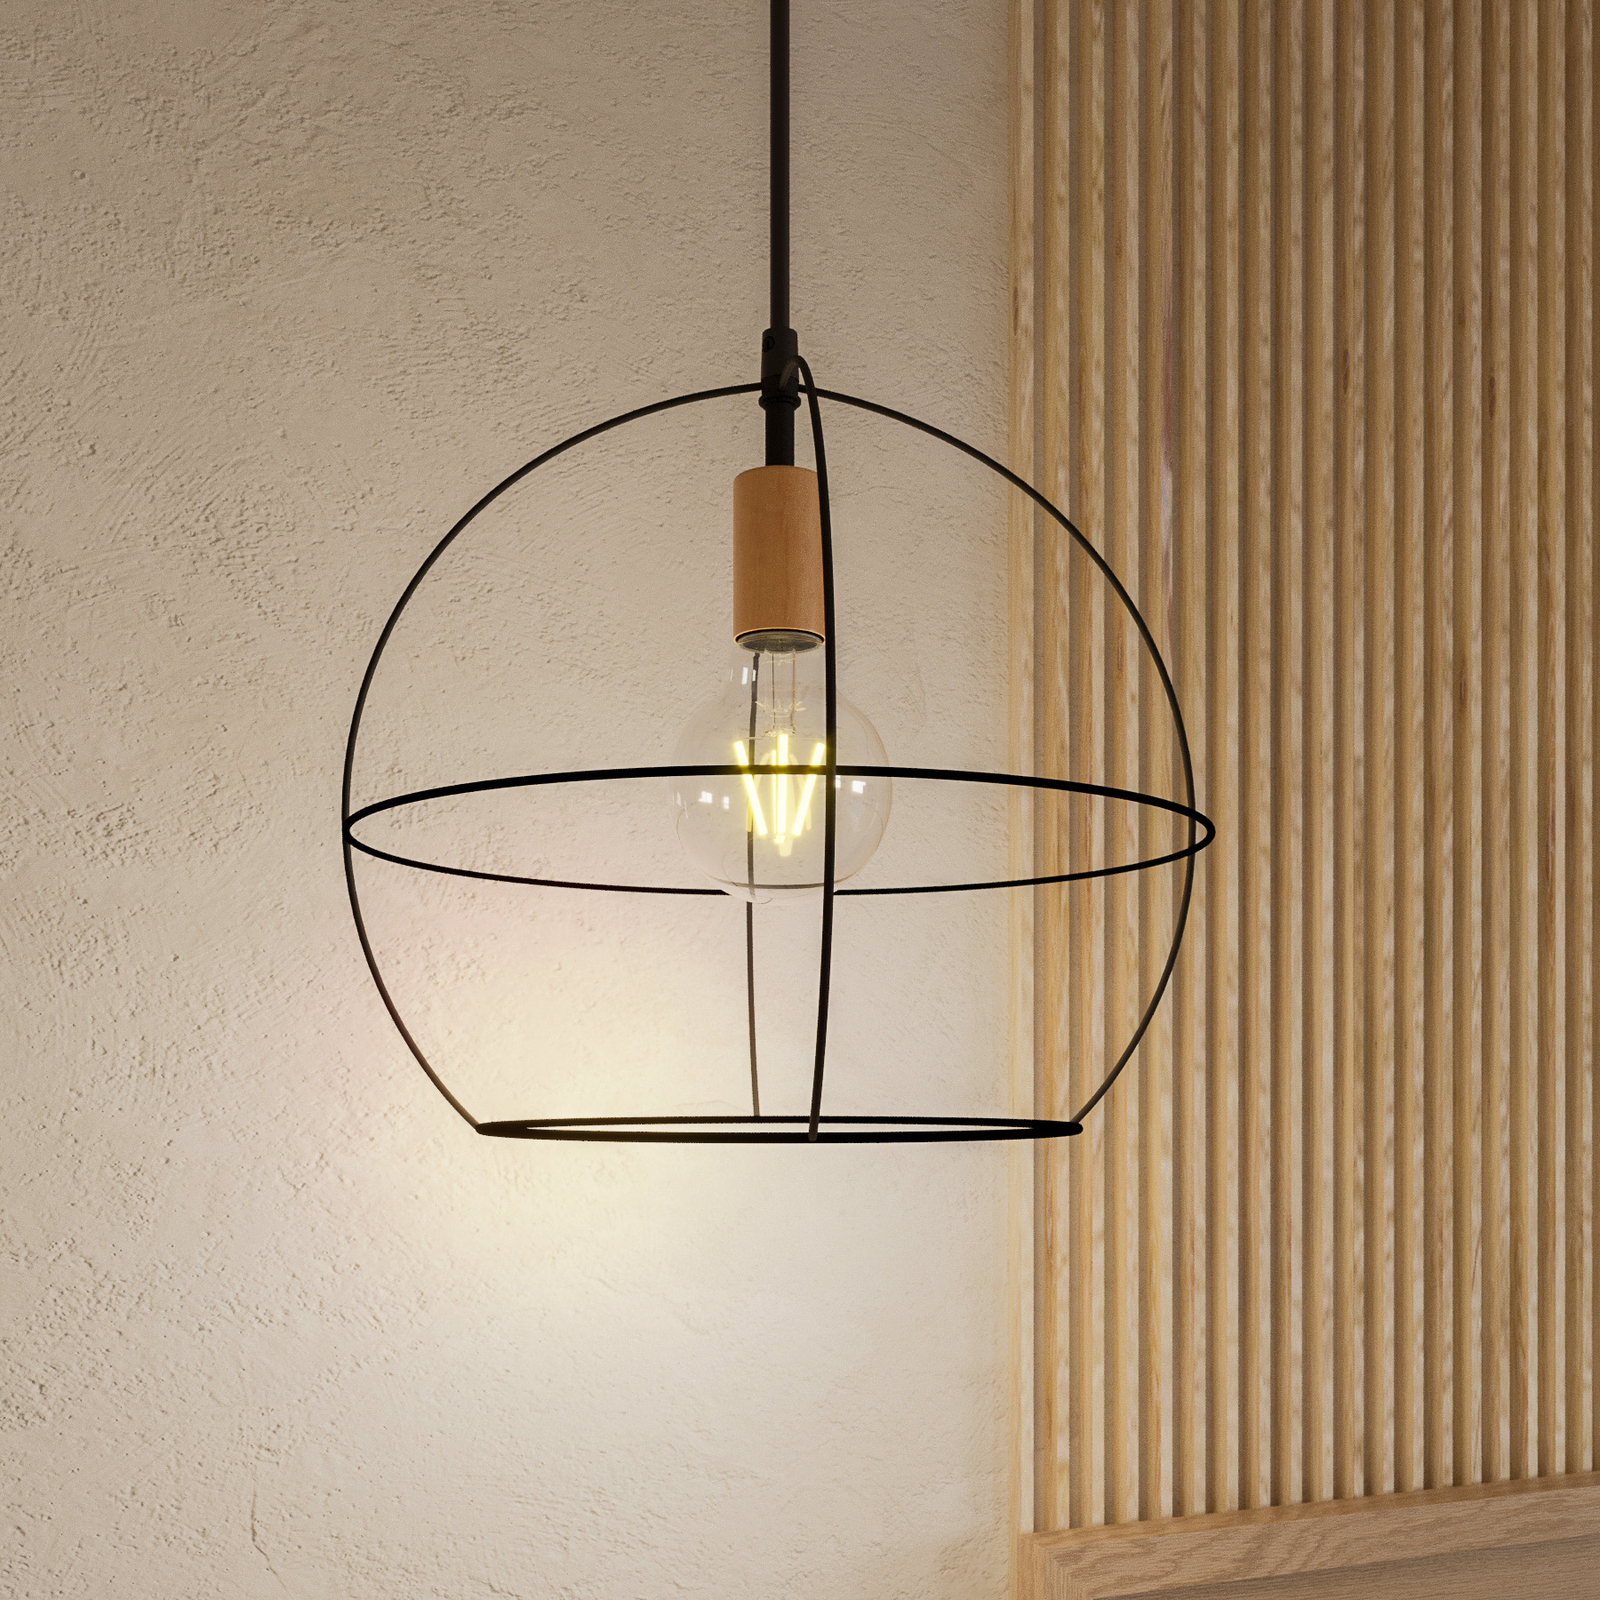 Envostar Open hanging light with metal shade, round